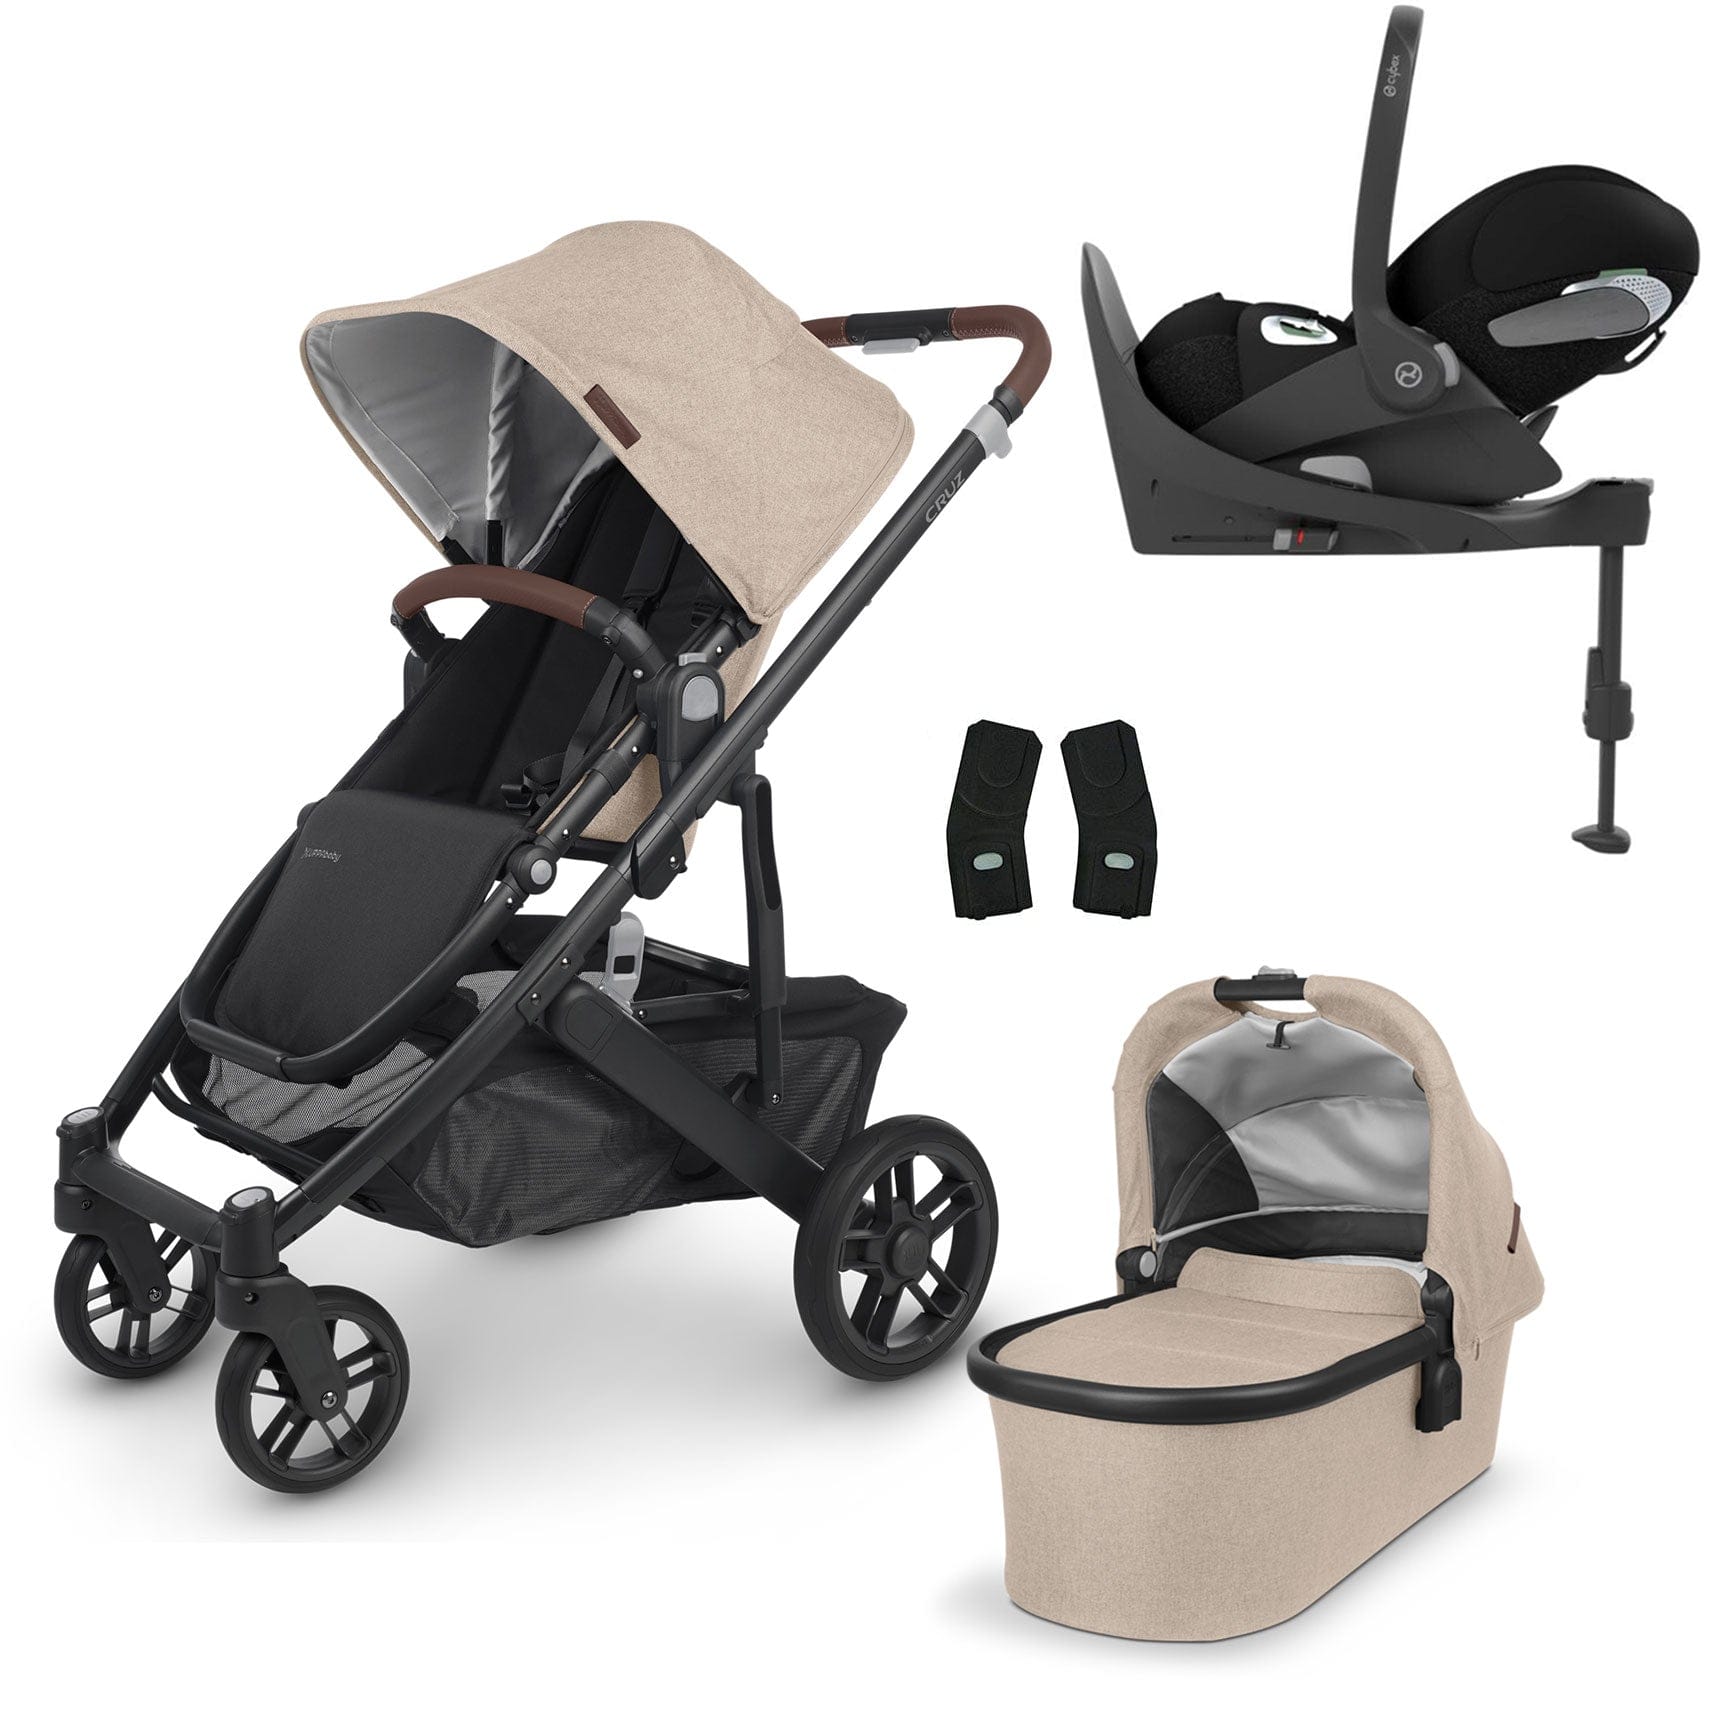 Uppababy travel systems UPPAbaby Cruz v2 Cloud T & Base Travel System - Liam 13985-LIA